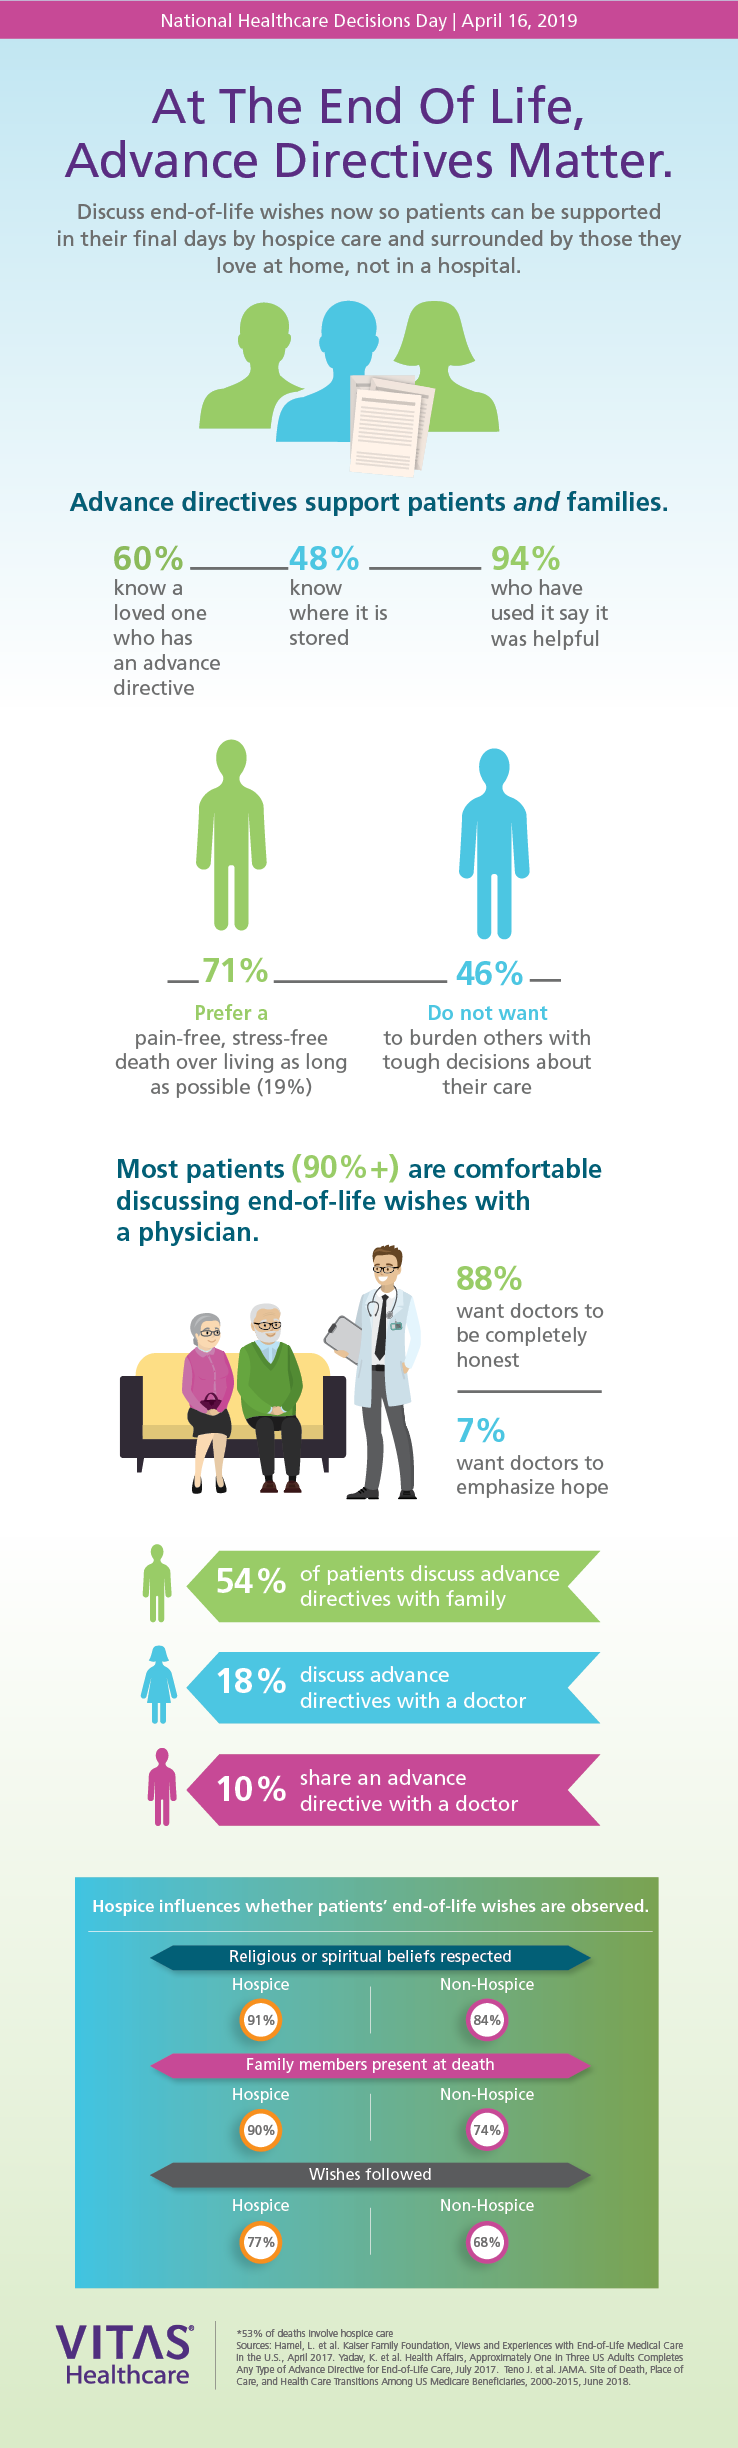 An infographic shows a vast majority of adults are comfortable talking to a physician about end-of-life wishes, and most prefer a pain-free, stress-free death over living as long as possible